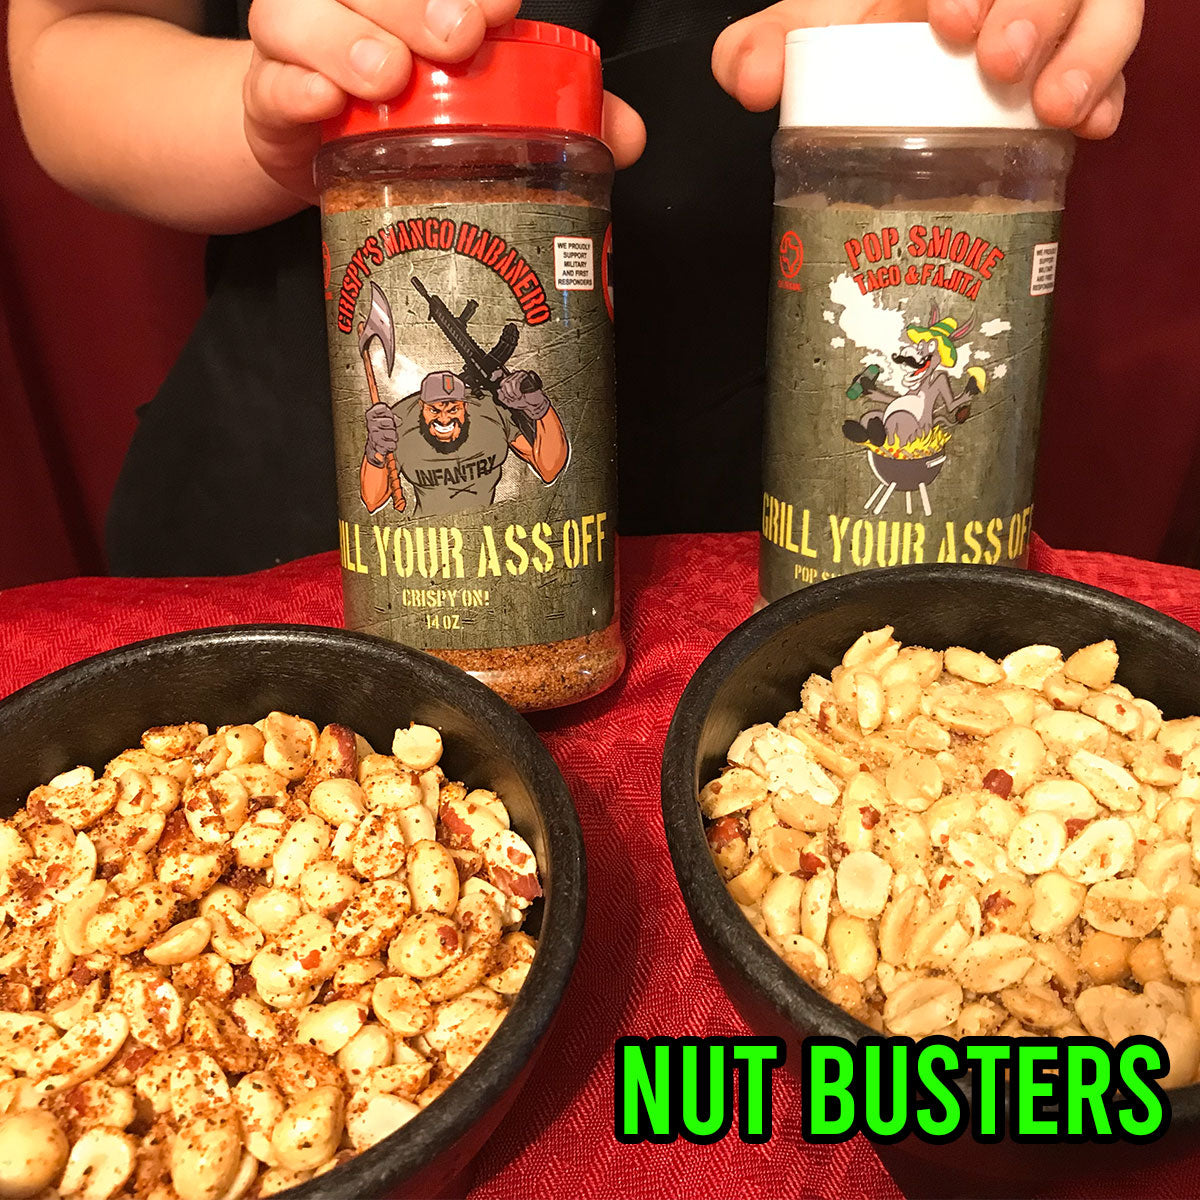 Nut Busters | Grill Your Ass Off